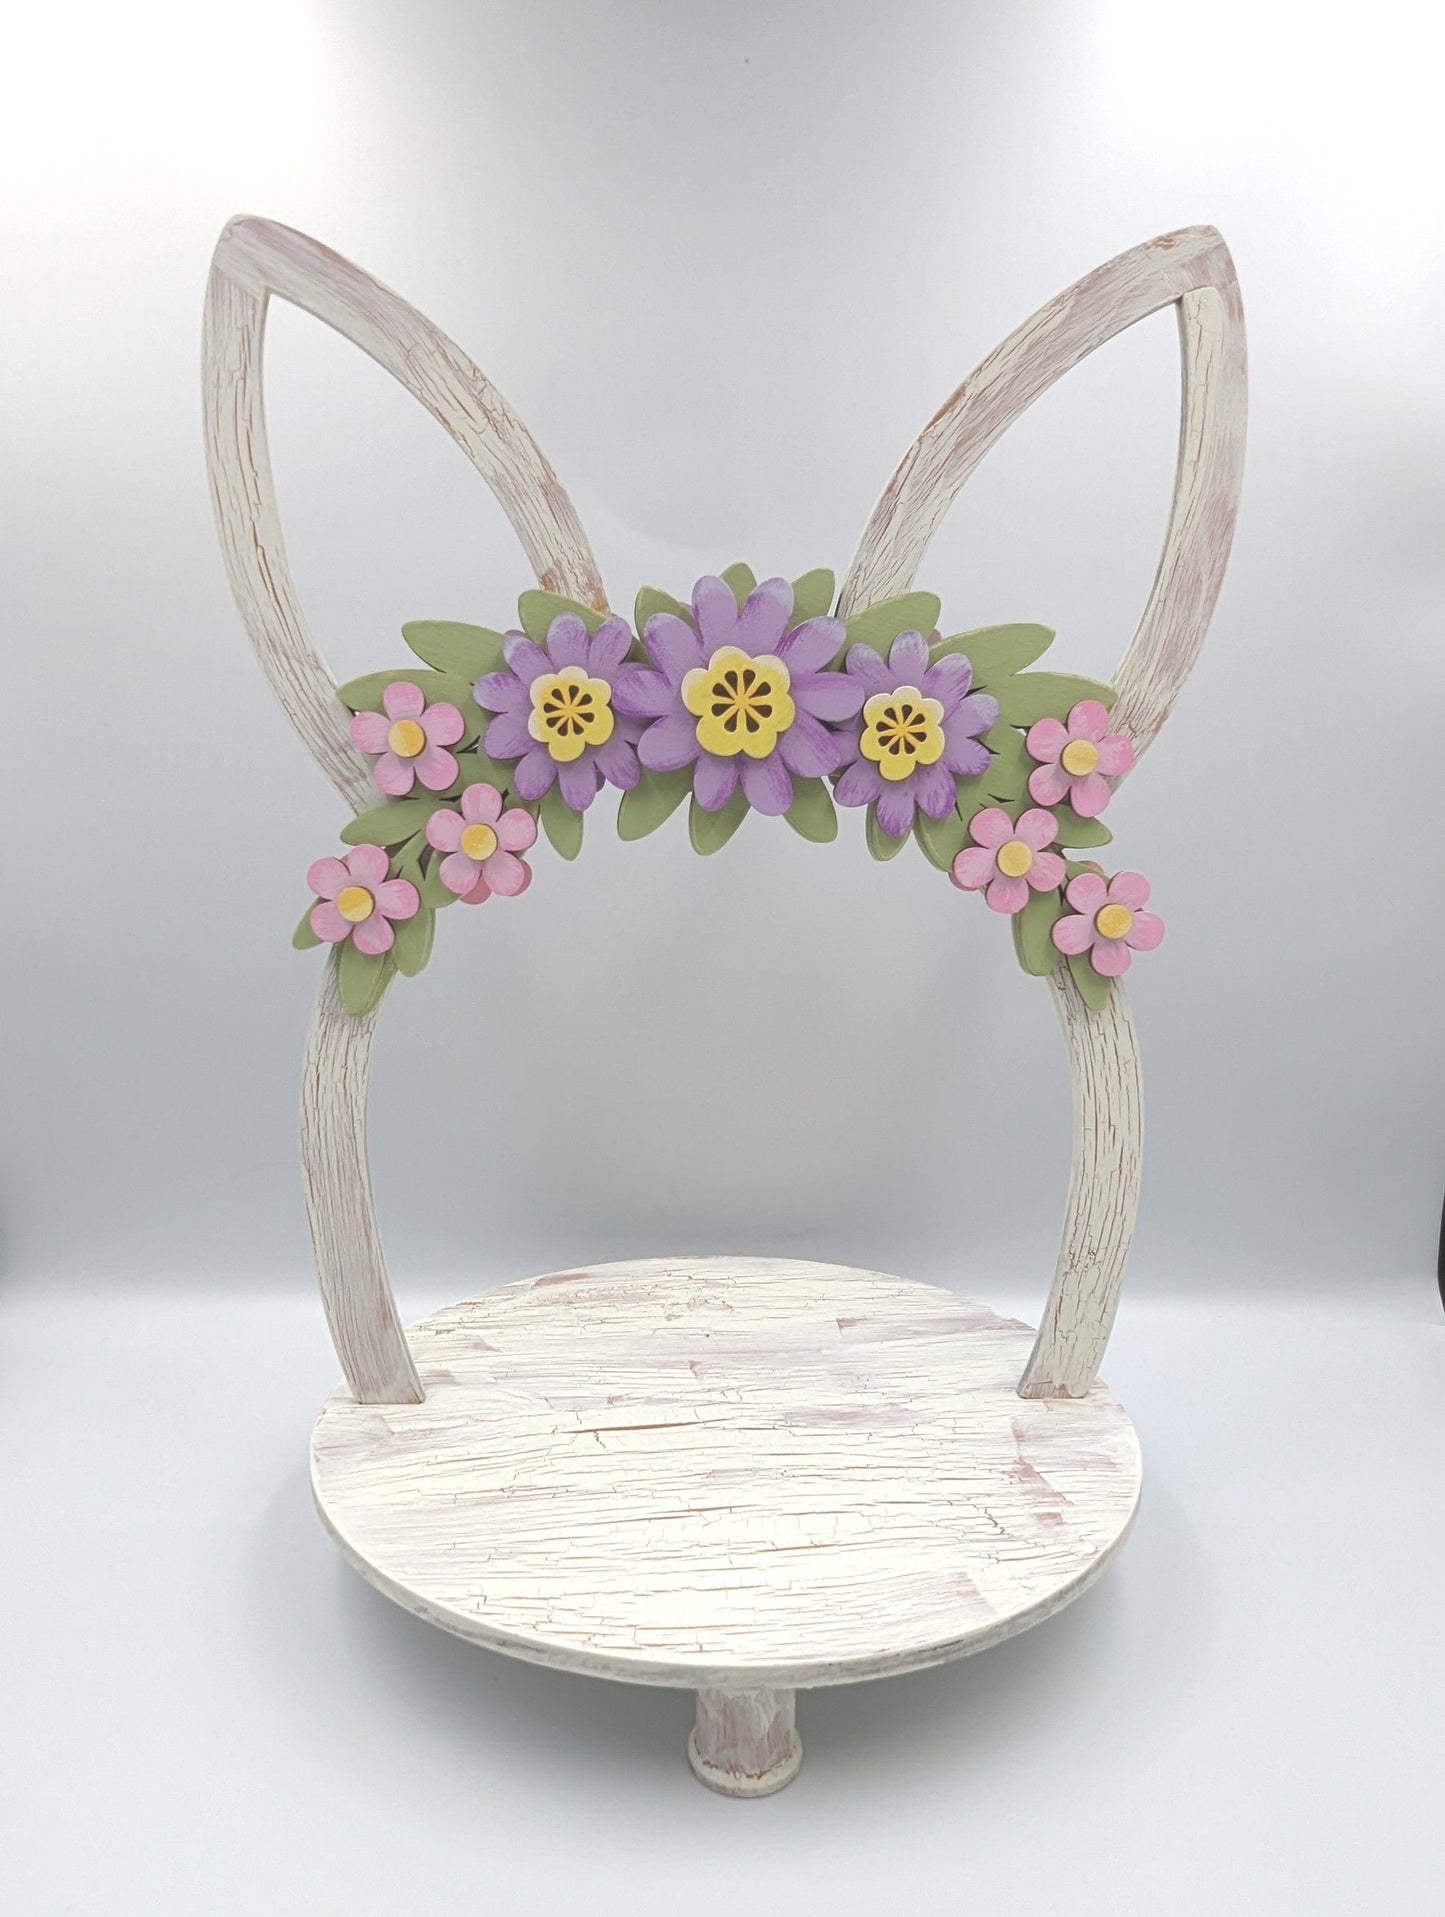 Charming wooden Easter tray with distressed chalk paint finish, featuring purple and pink flowers on a green leaf swag, and Easter bunny ears. Hand-painted and laser cut, this 2-sided tray can be enjoyed from all angles and is perfect for displaying candles with flowers or cookies. The tray also features unique repurposed sewing thread spools for feet, adding to its charm and eco-friendliness.